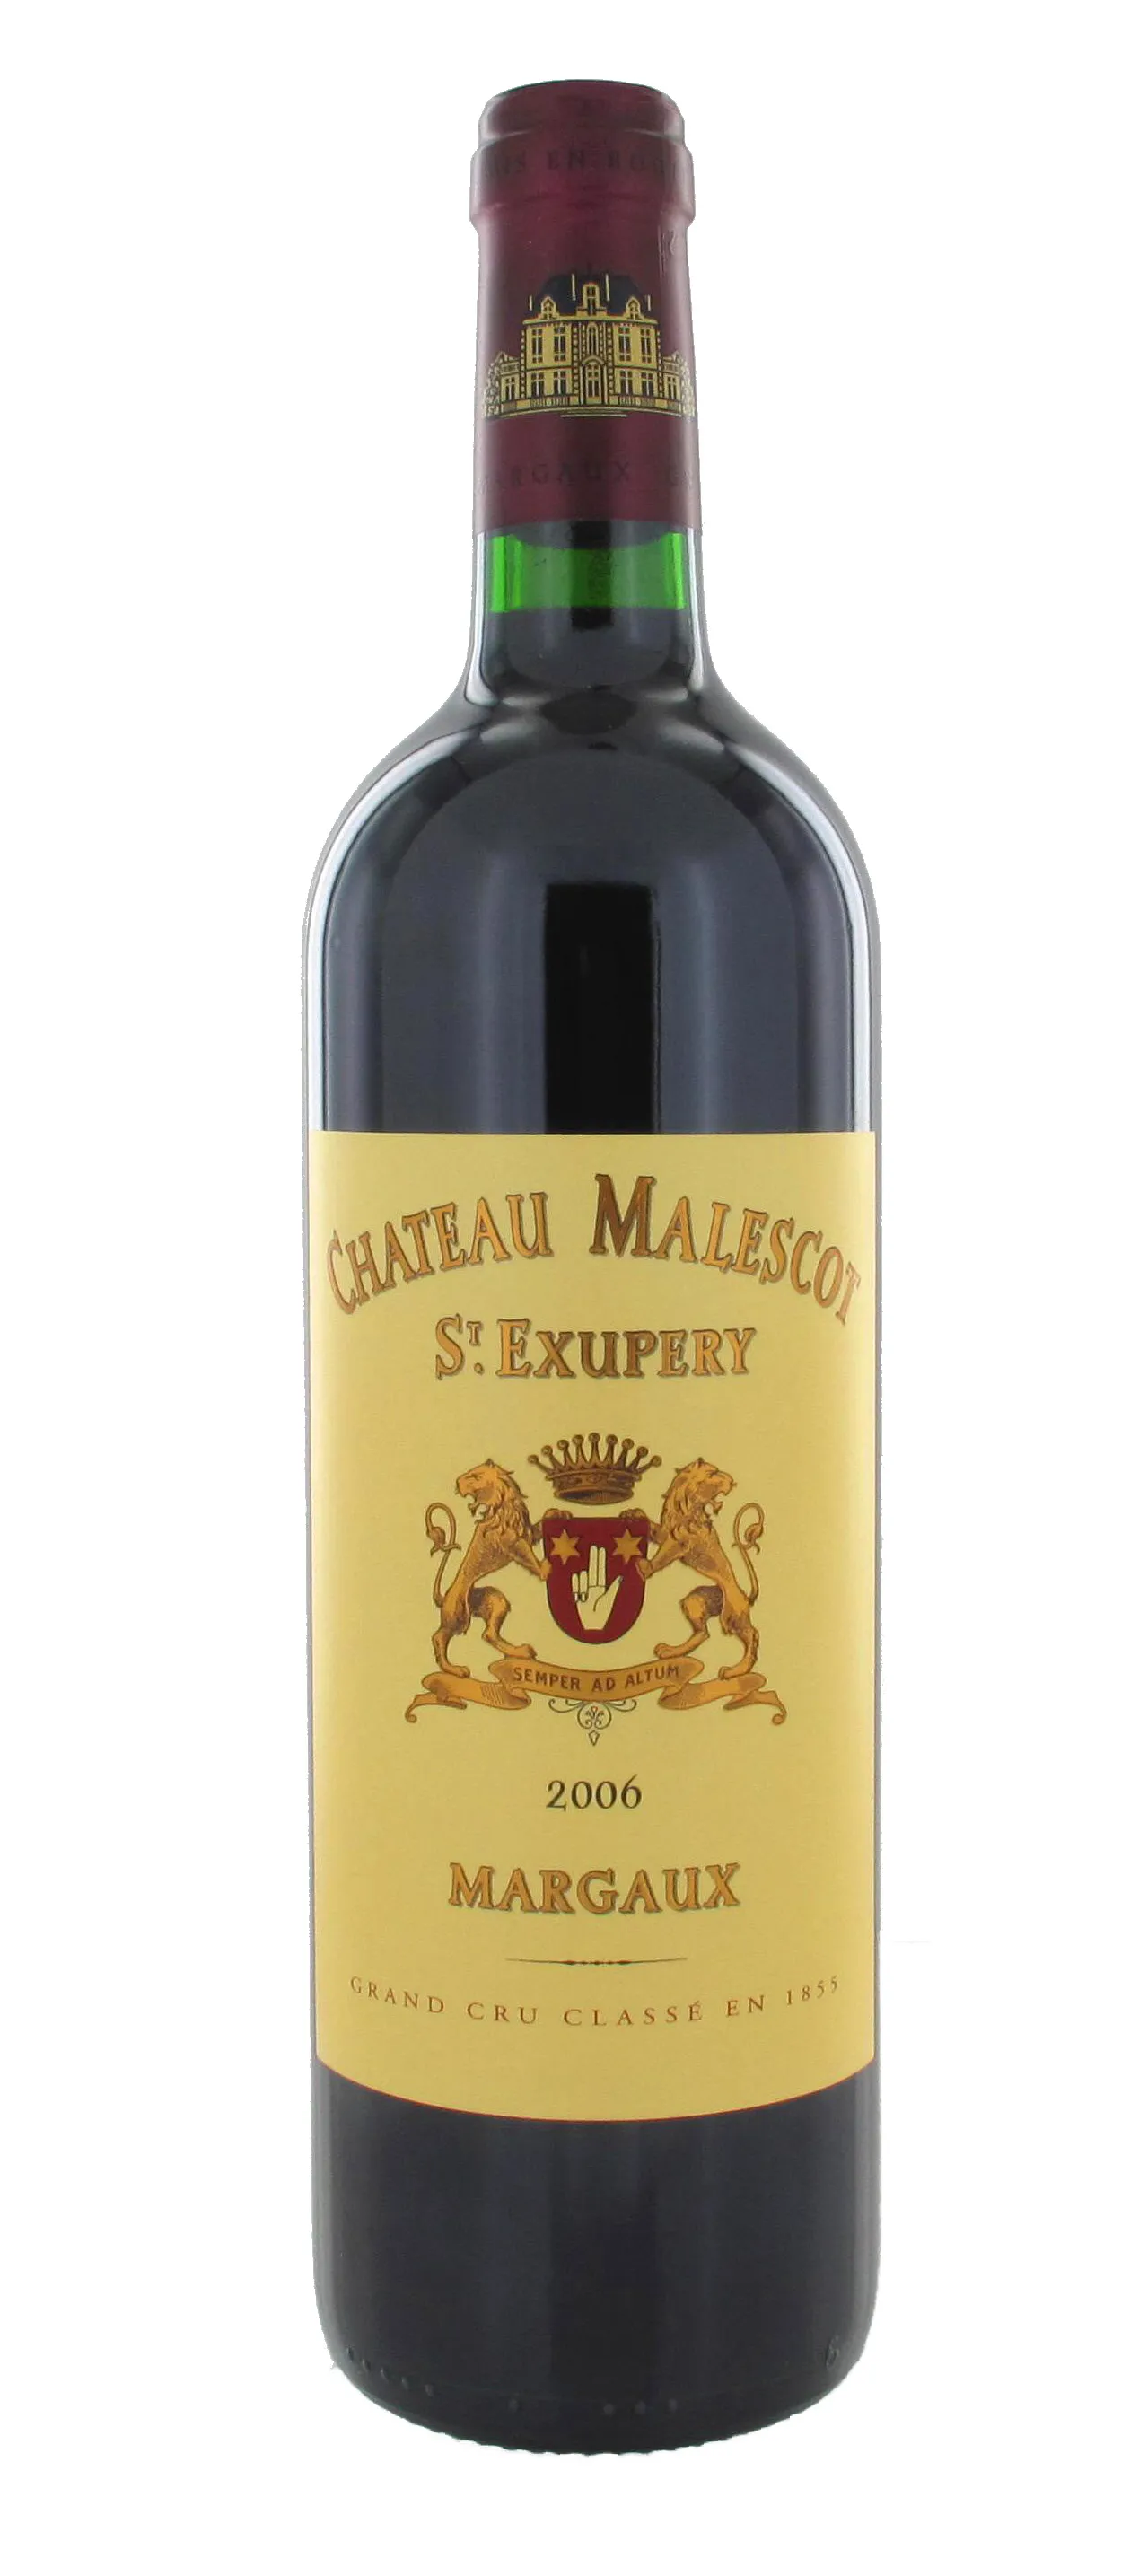 Malescot-St-Exupery Margaux